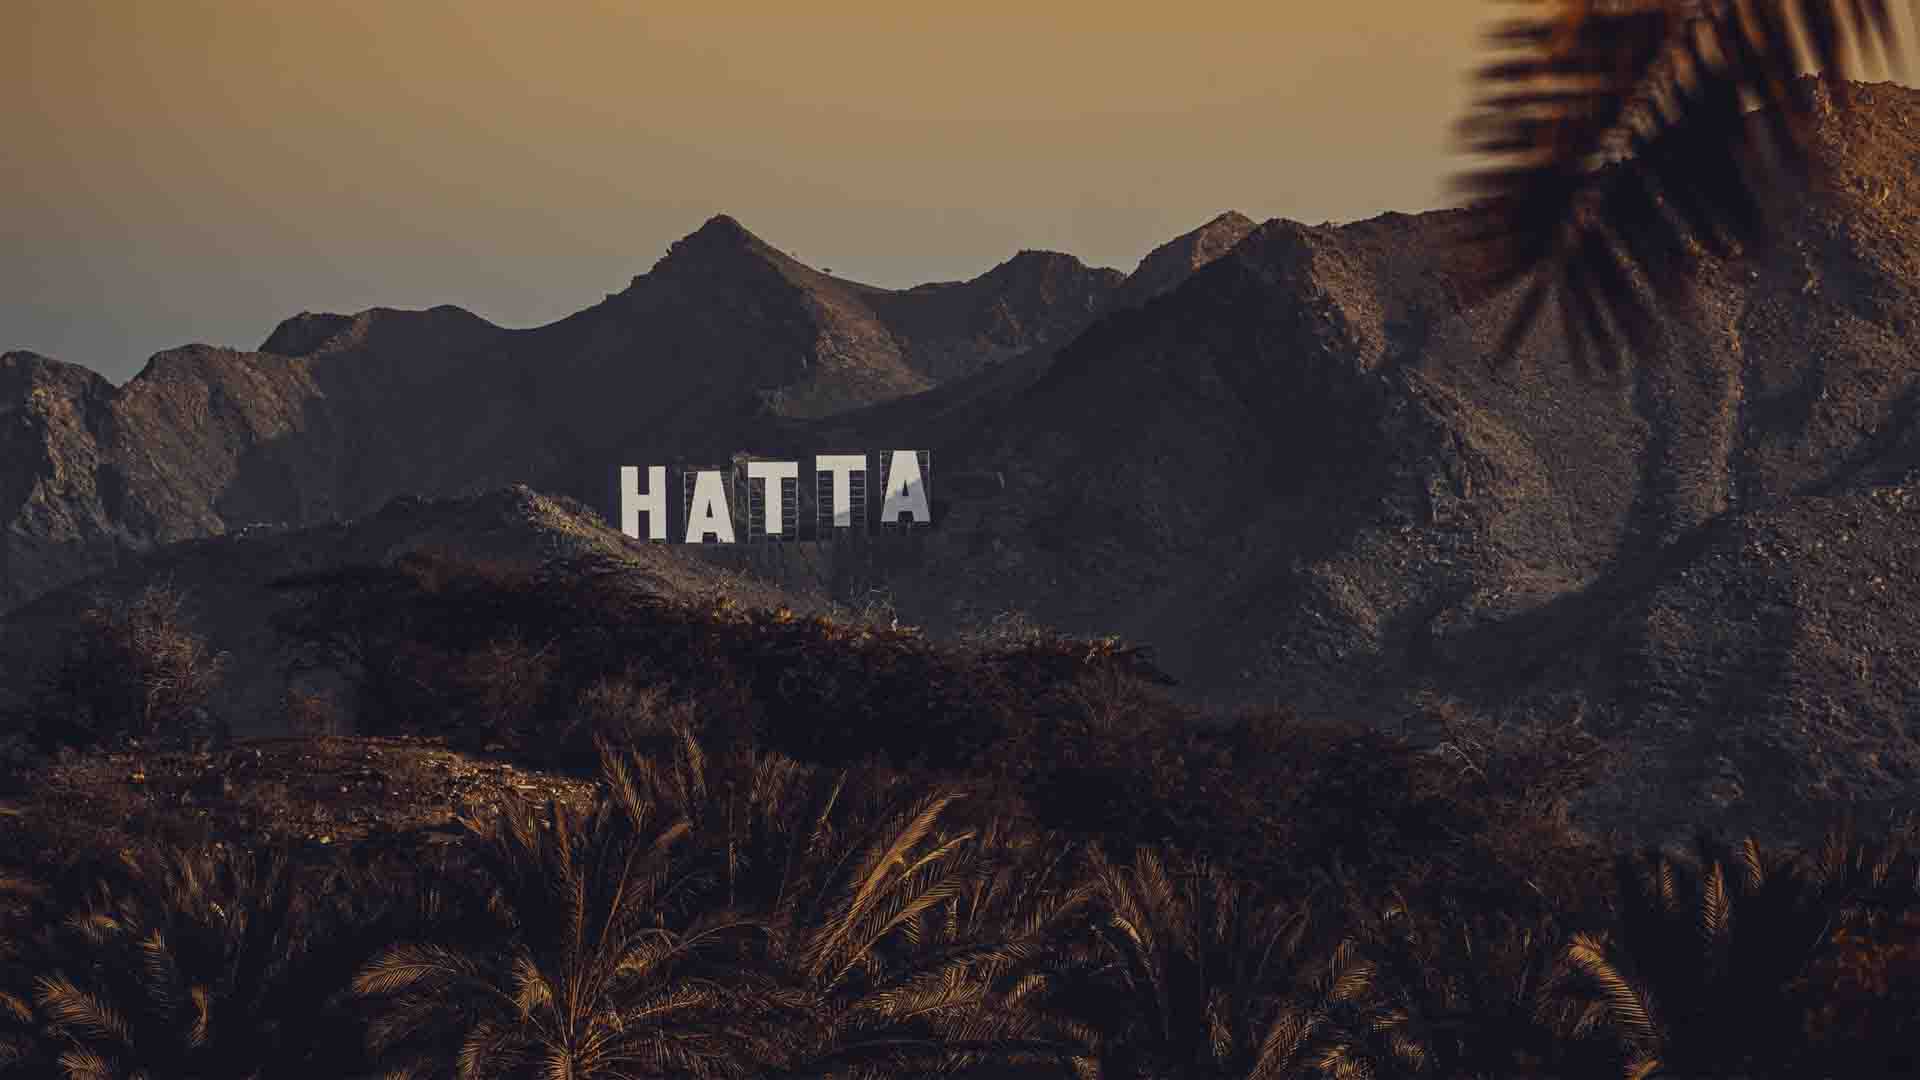 5 opening dates are being announced by Hatta Resorts and Hatta Wadi Hub